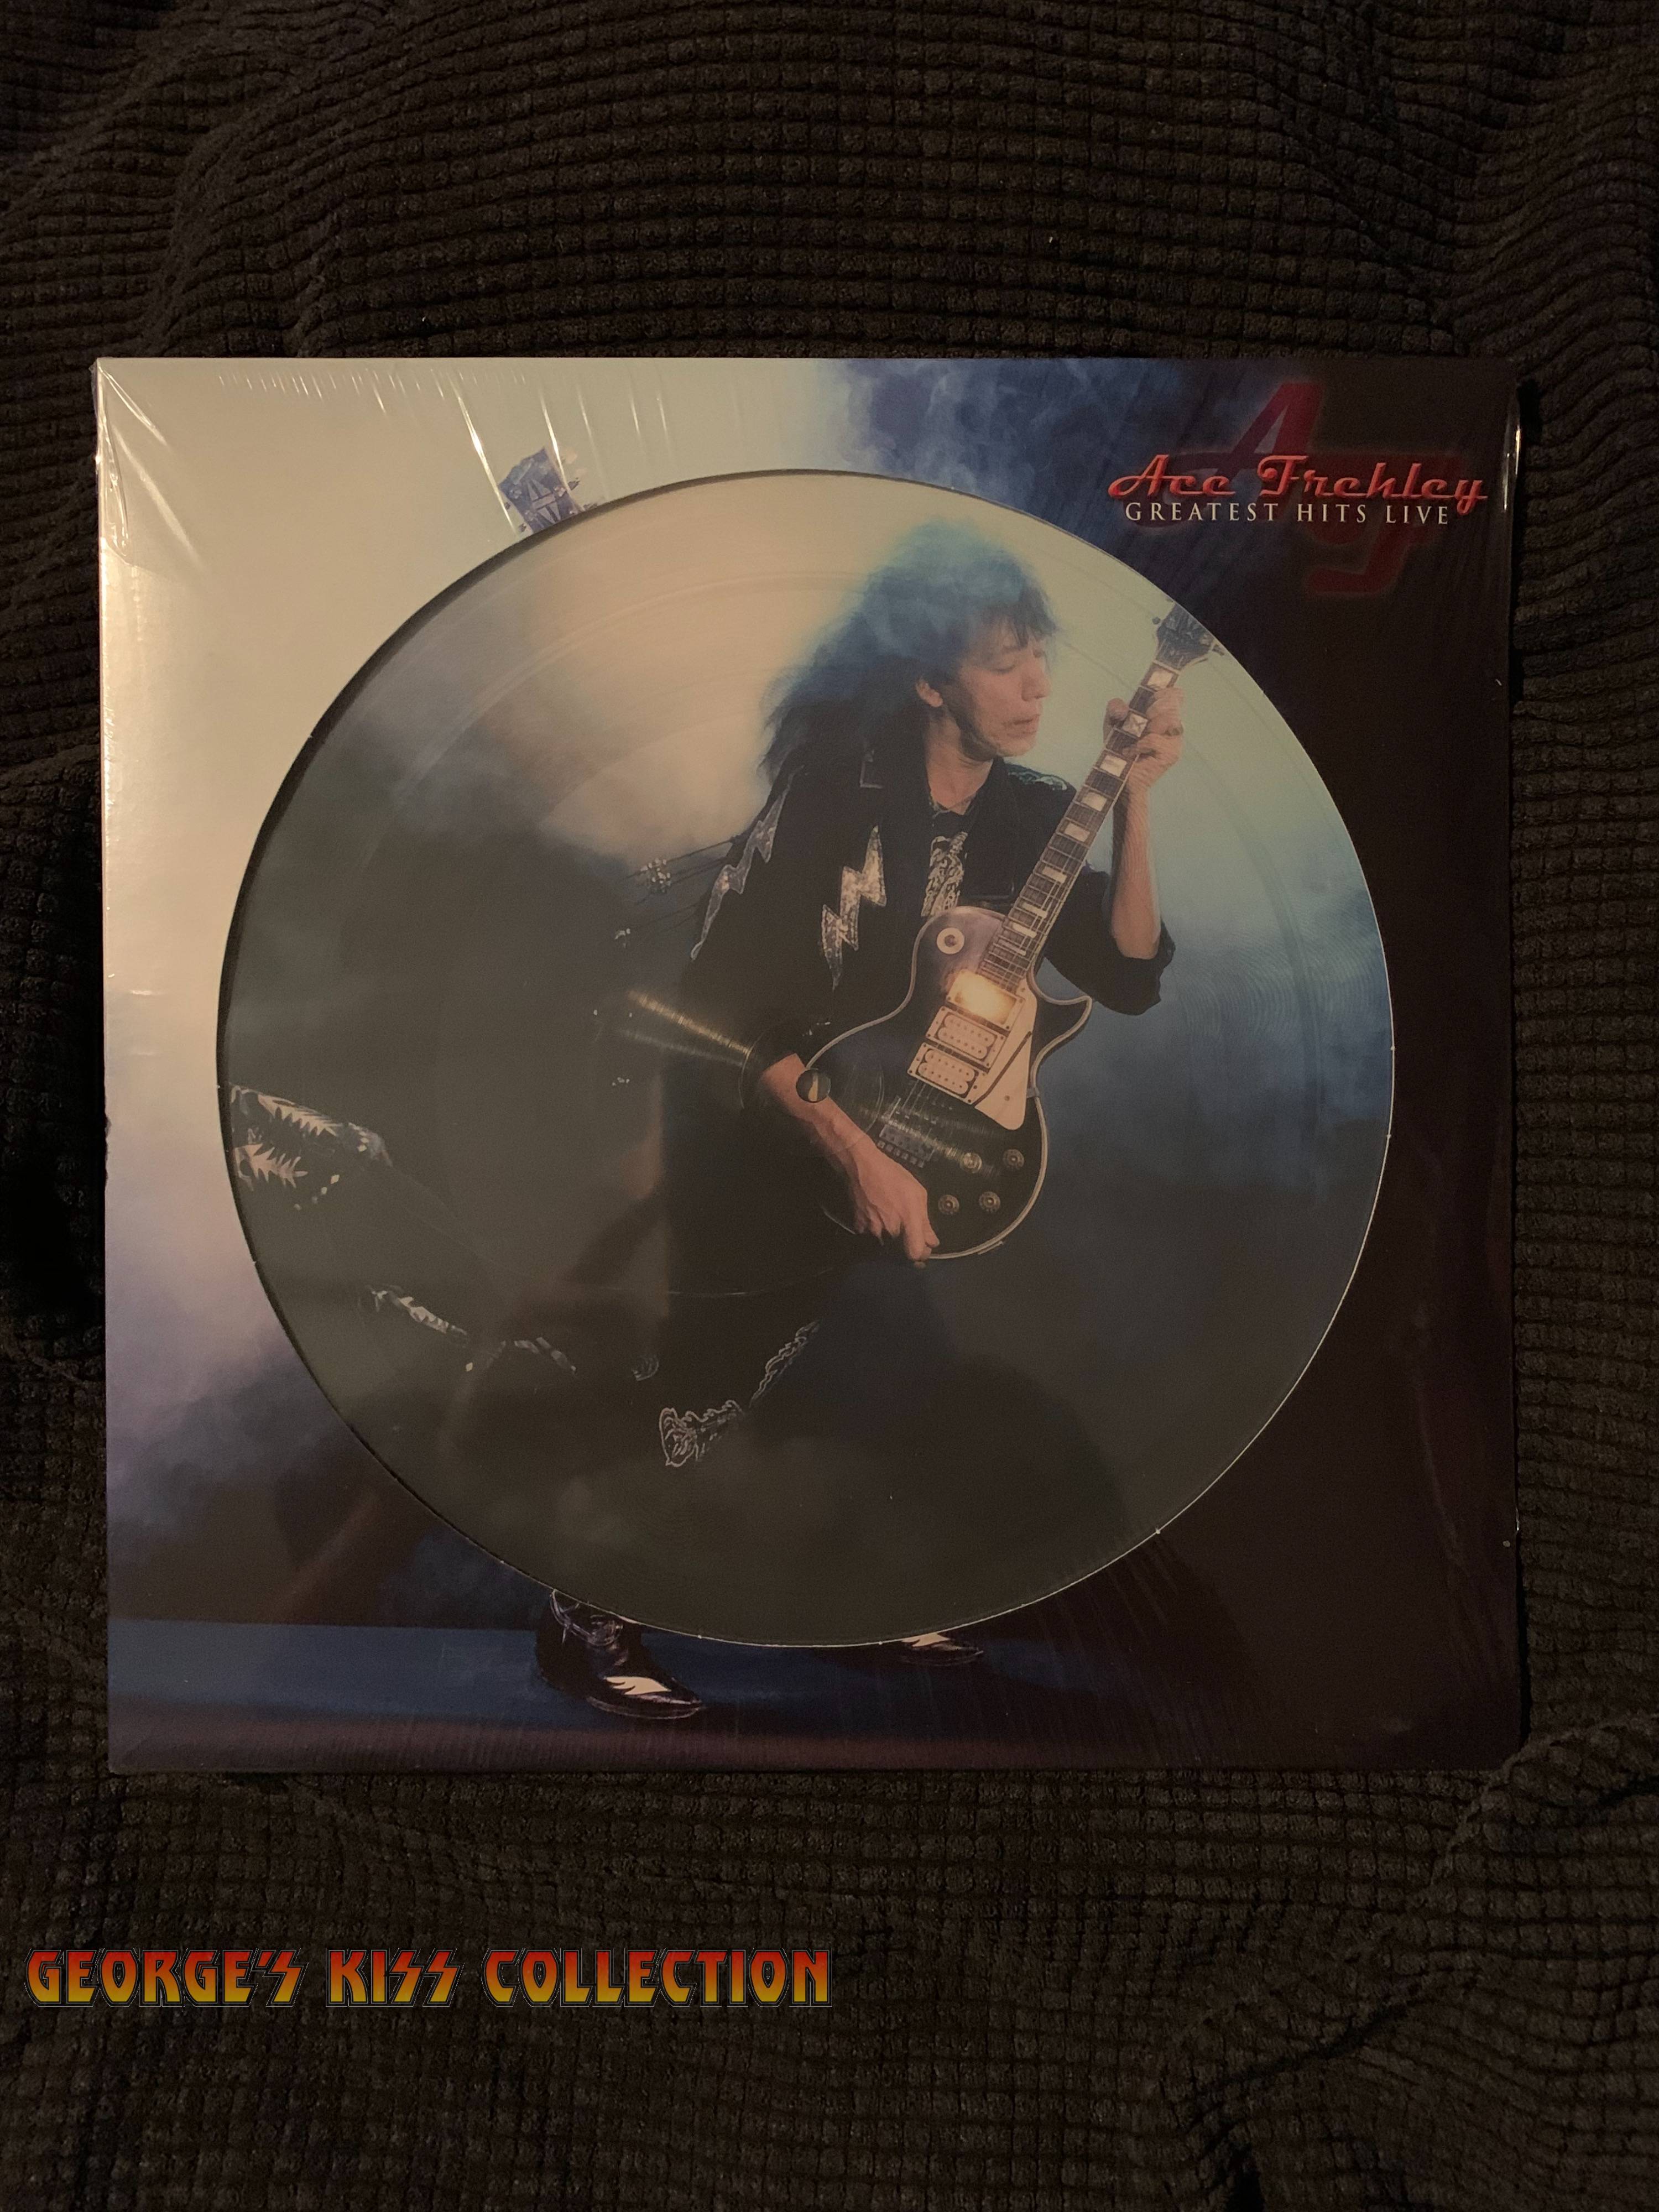 Ace Frehley Greatest Hits Vinyl In George's KISS Collection